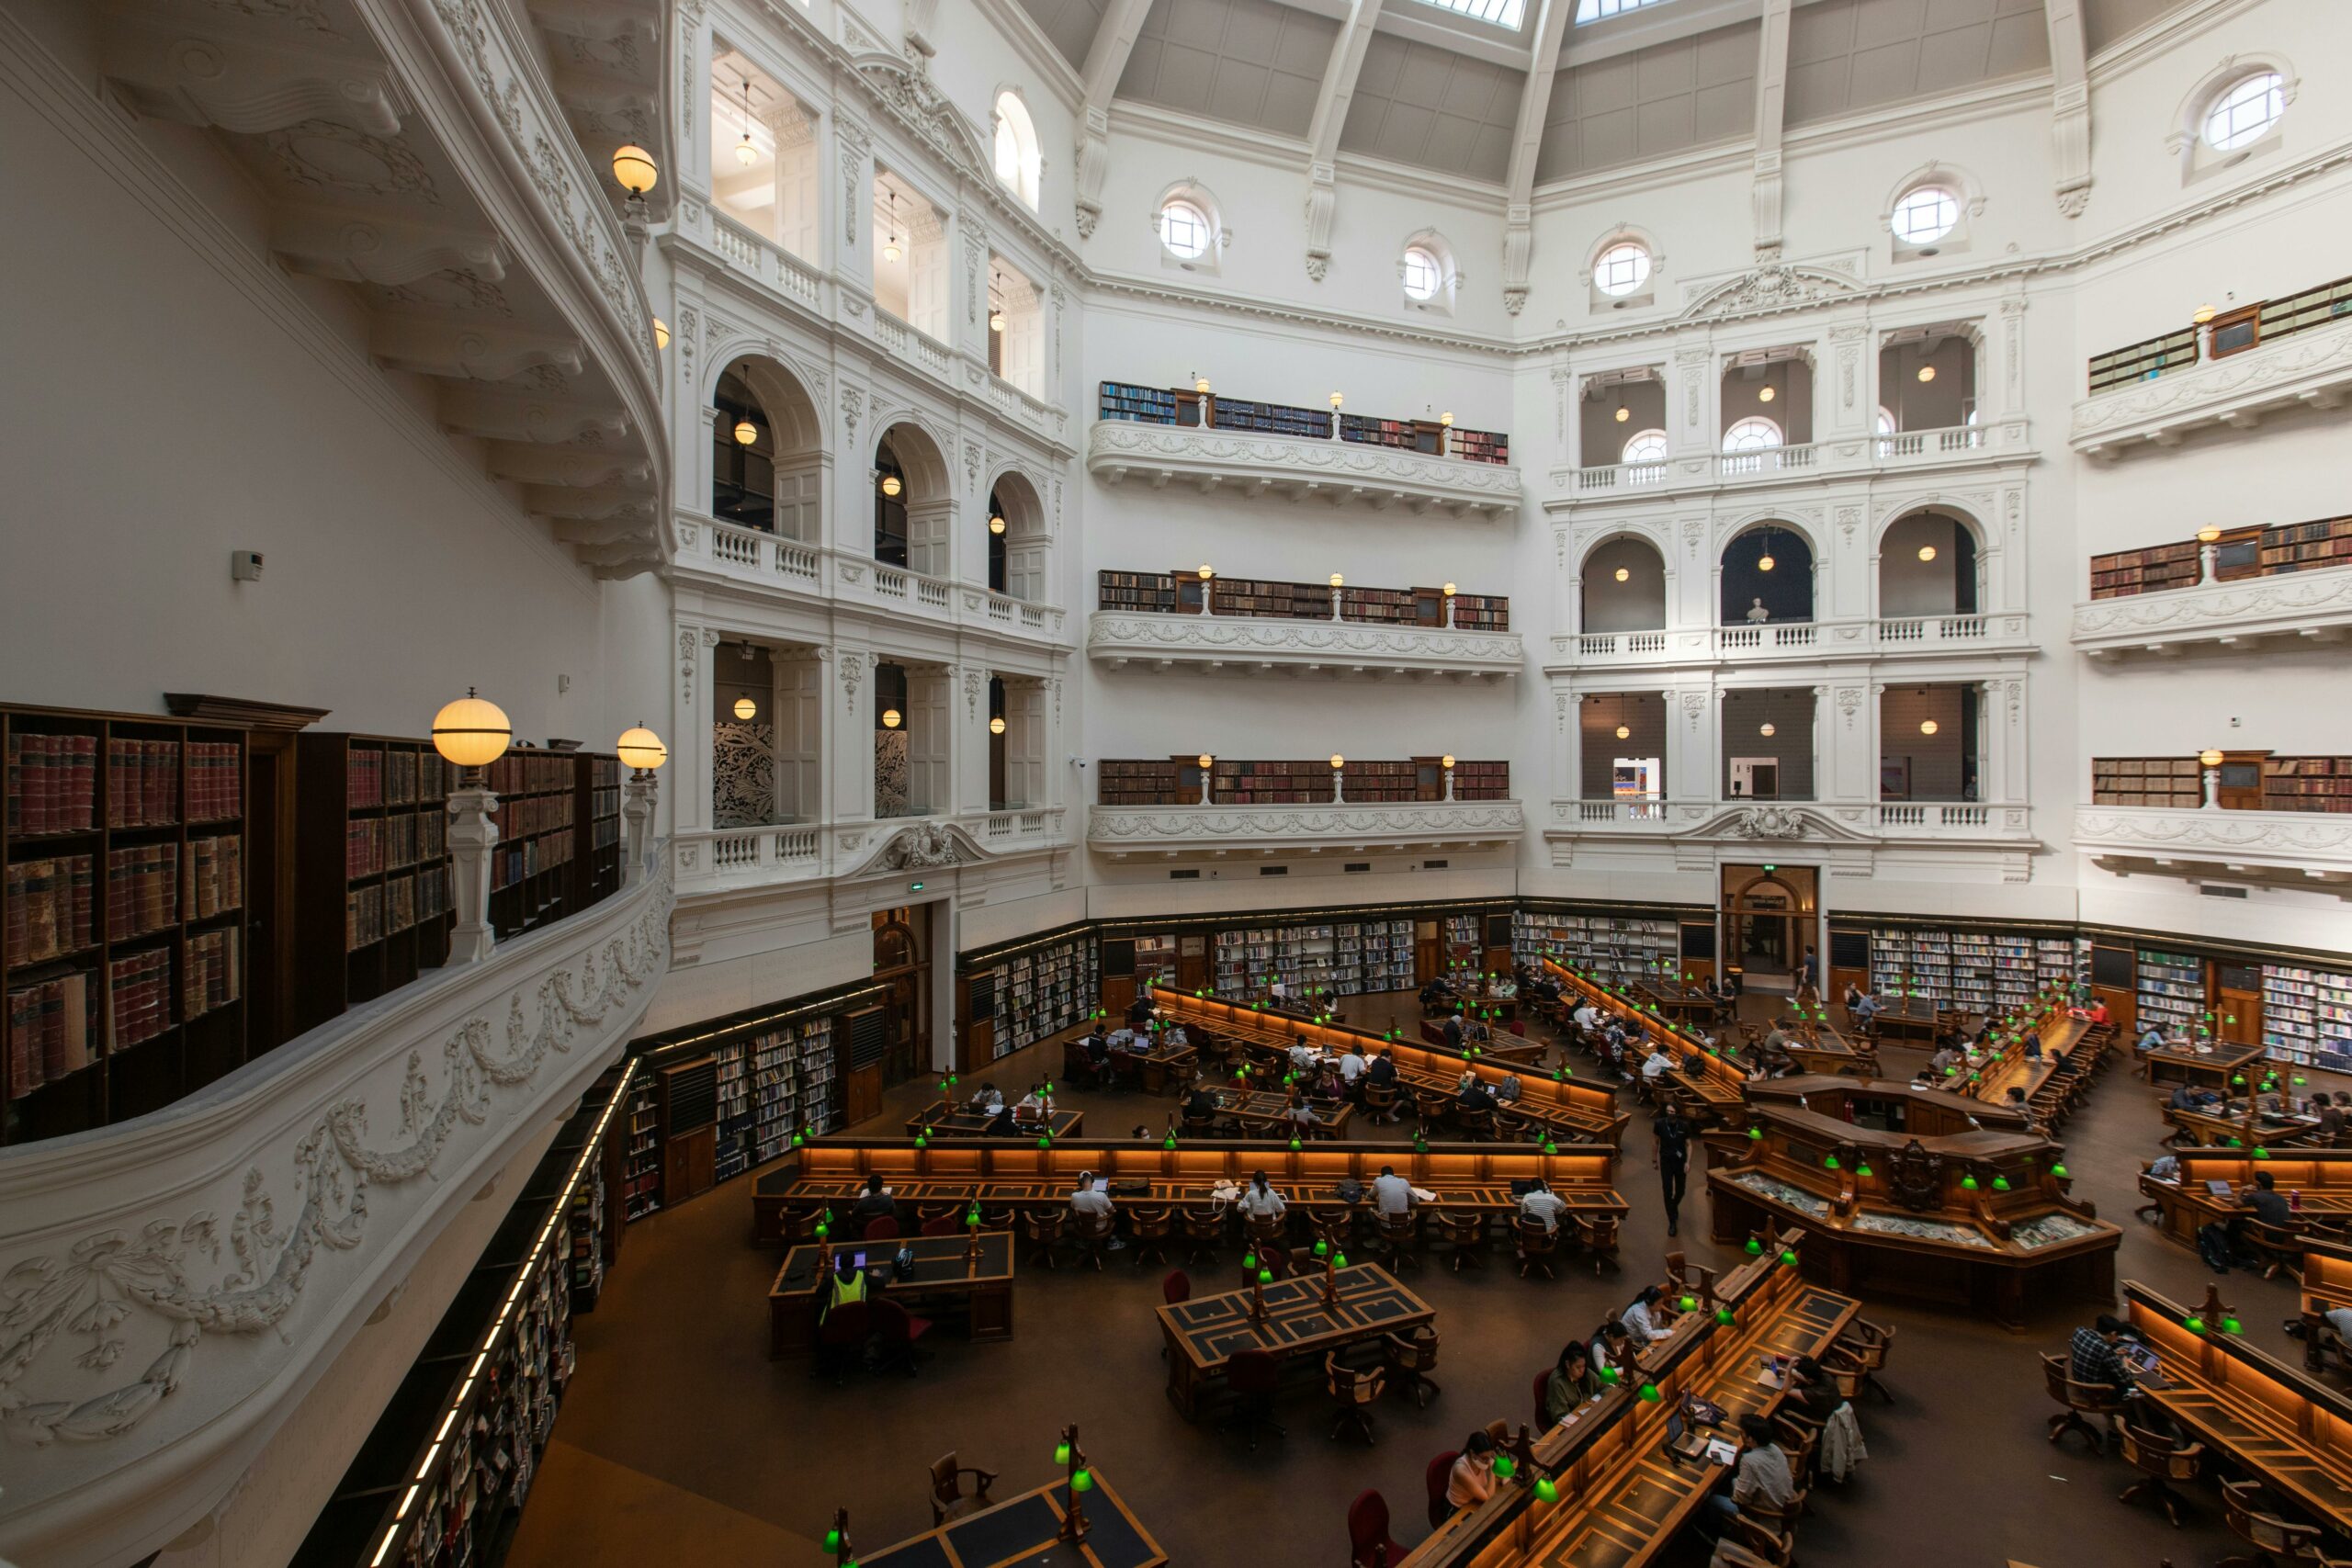 Interior of a grand library with rows of reading tables and multiple levels of bookshelves.